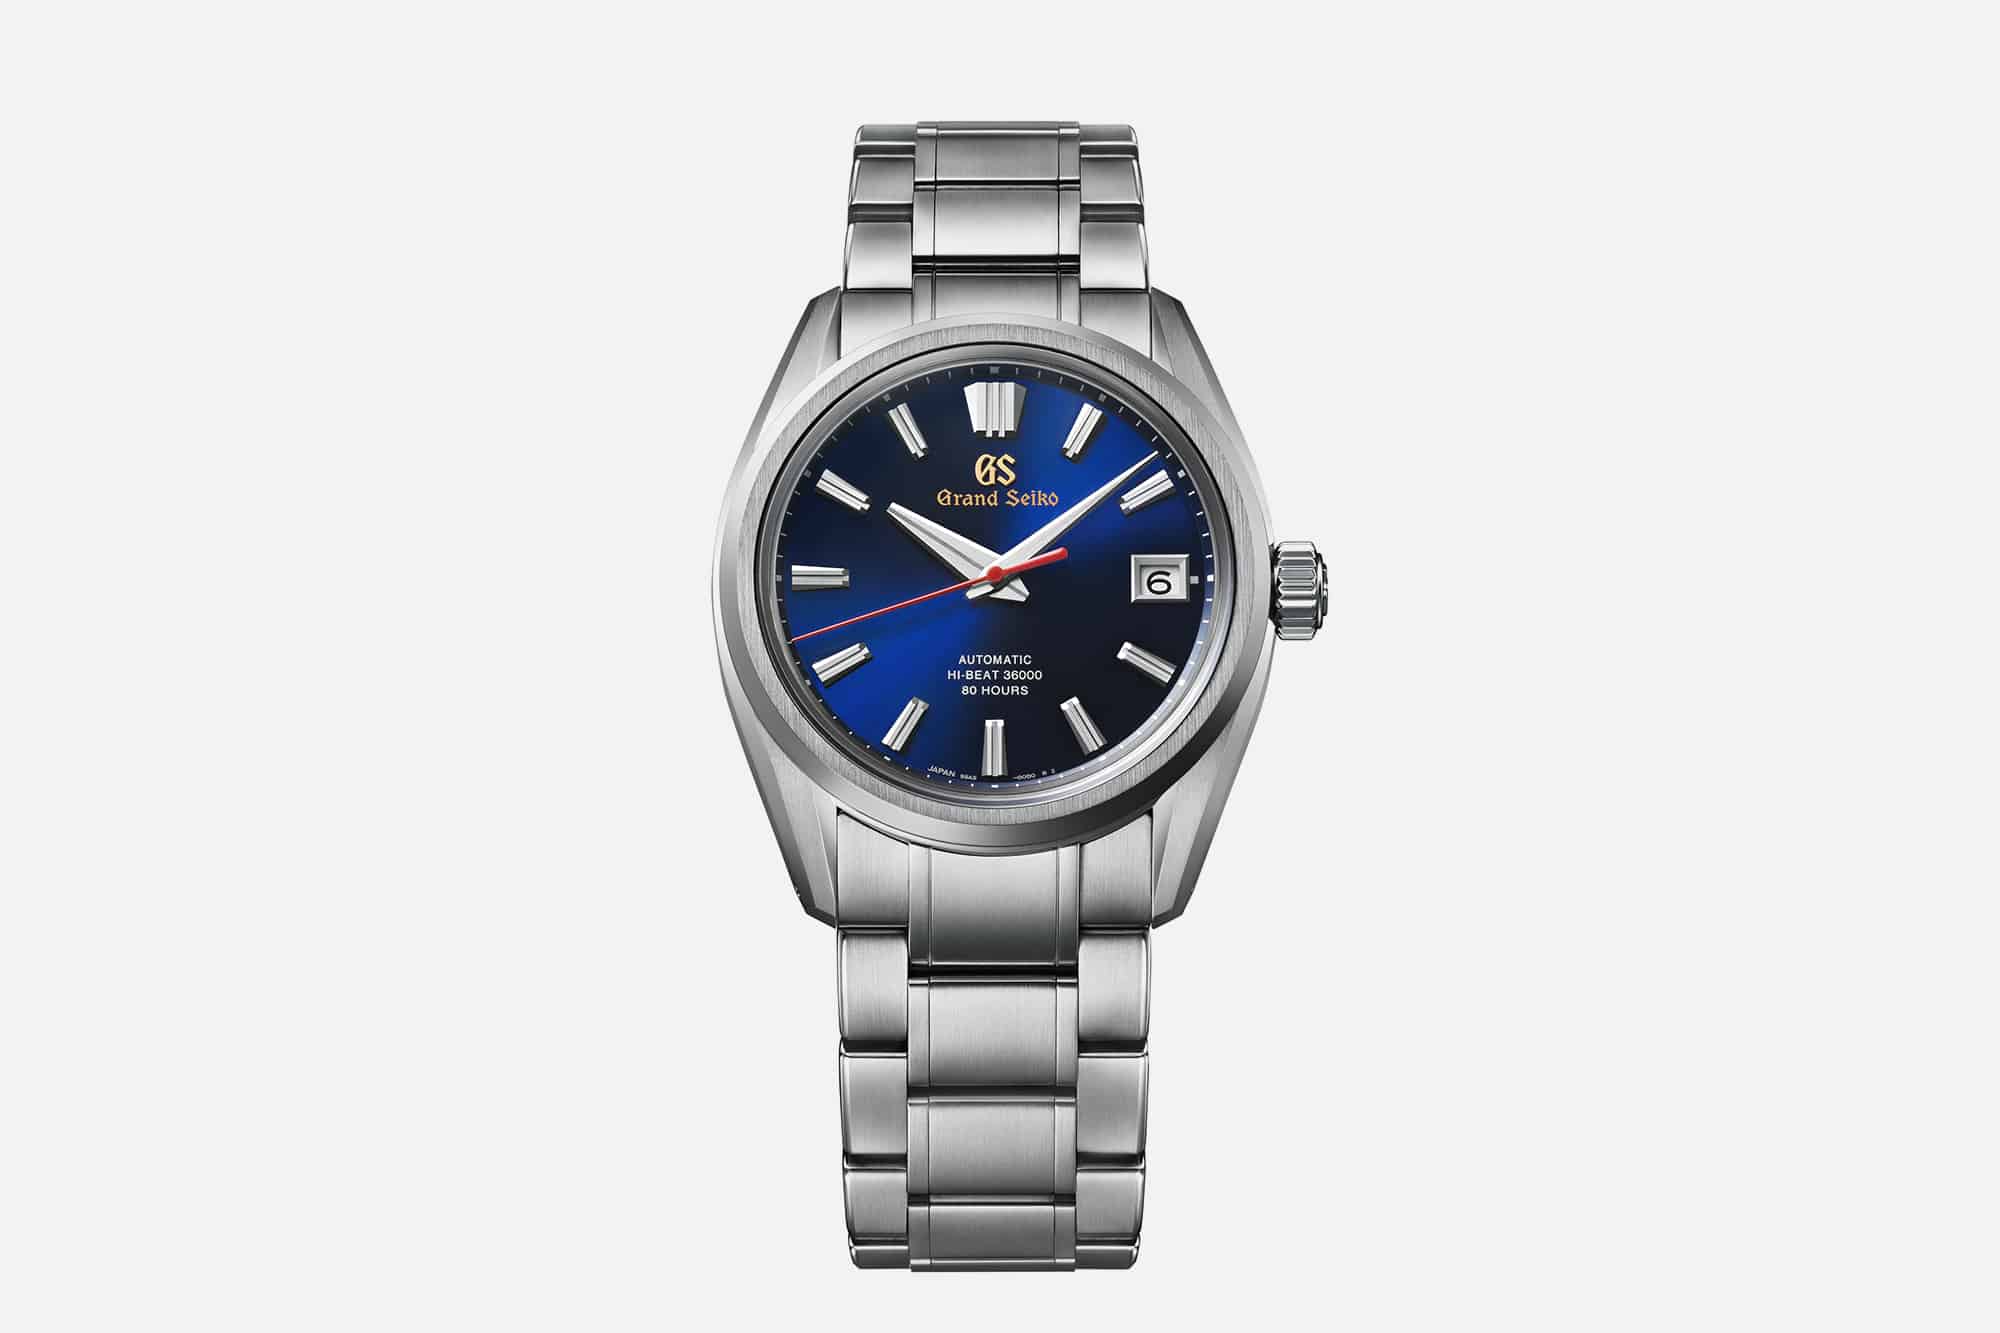 Grand Seiko’s Revolutionary 9SA5 Movement Gets the Stainless Steel Treatment with the SLGH003